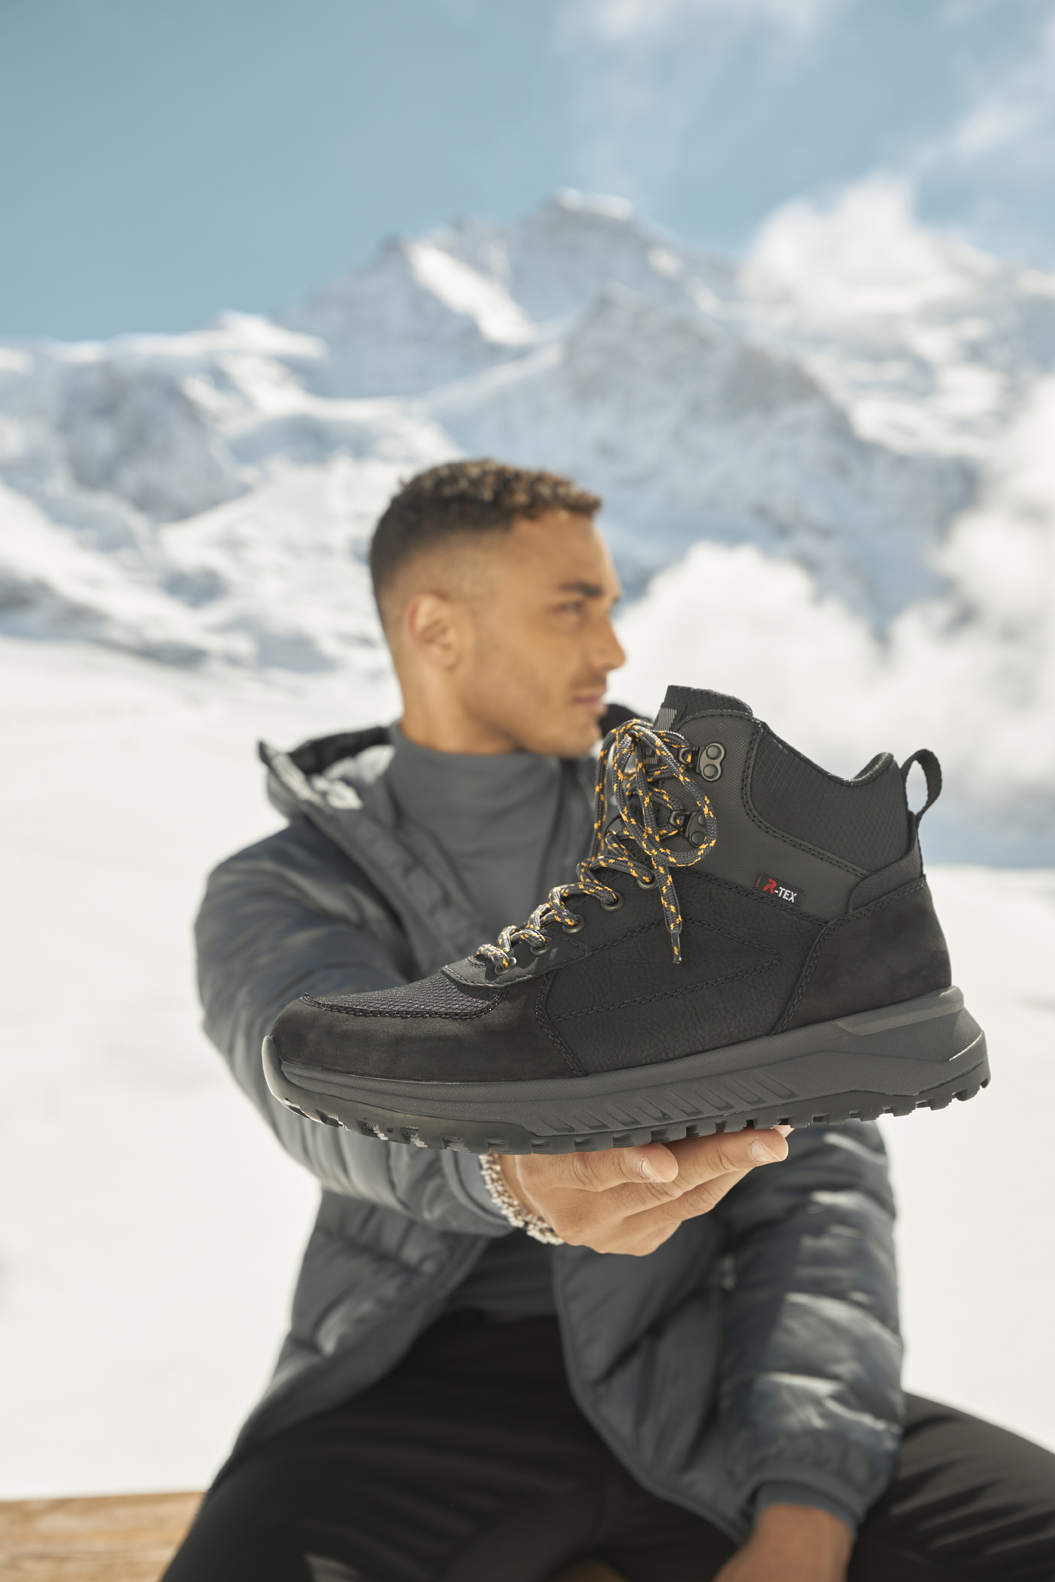 Black R-EVOLUTION boots by Rieker made of synthetic leather with zipper, extra soft and removable insole and super light and flexible outsole. Matching the shoes, the dark-haired man is wearing black jeans with a grey turtleneck sweater, sunglasses and a grey vest while sitting on a bench in the snow.